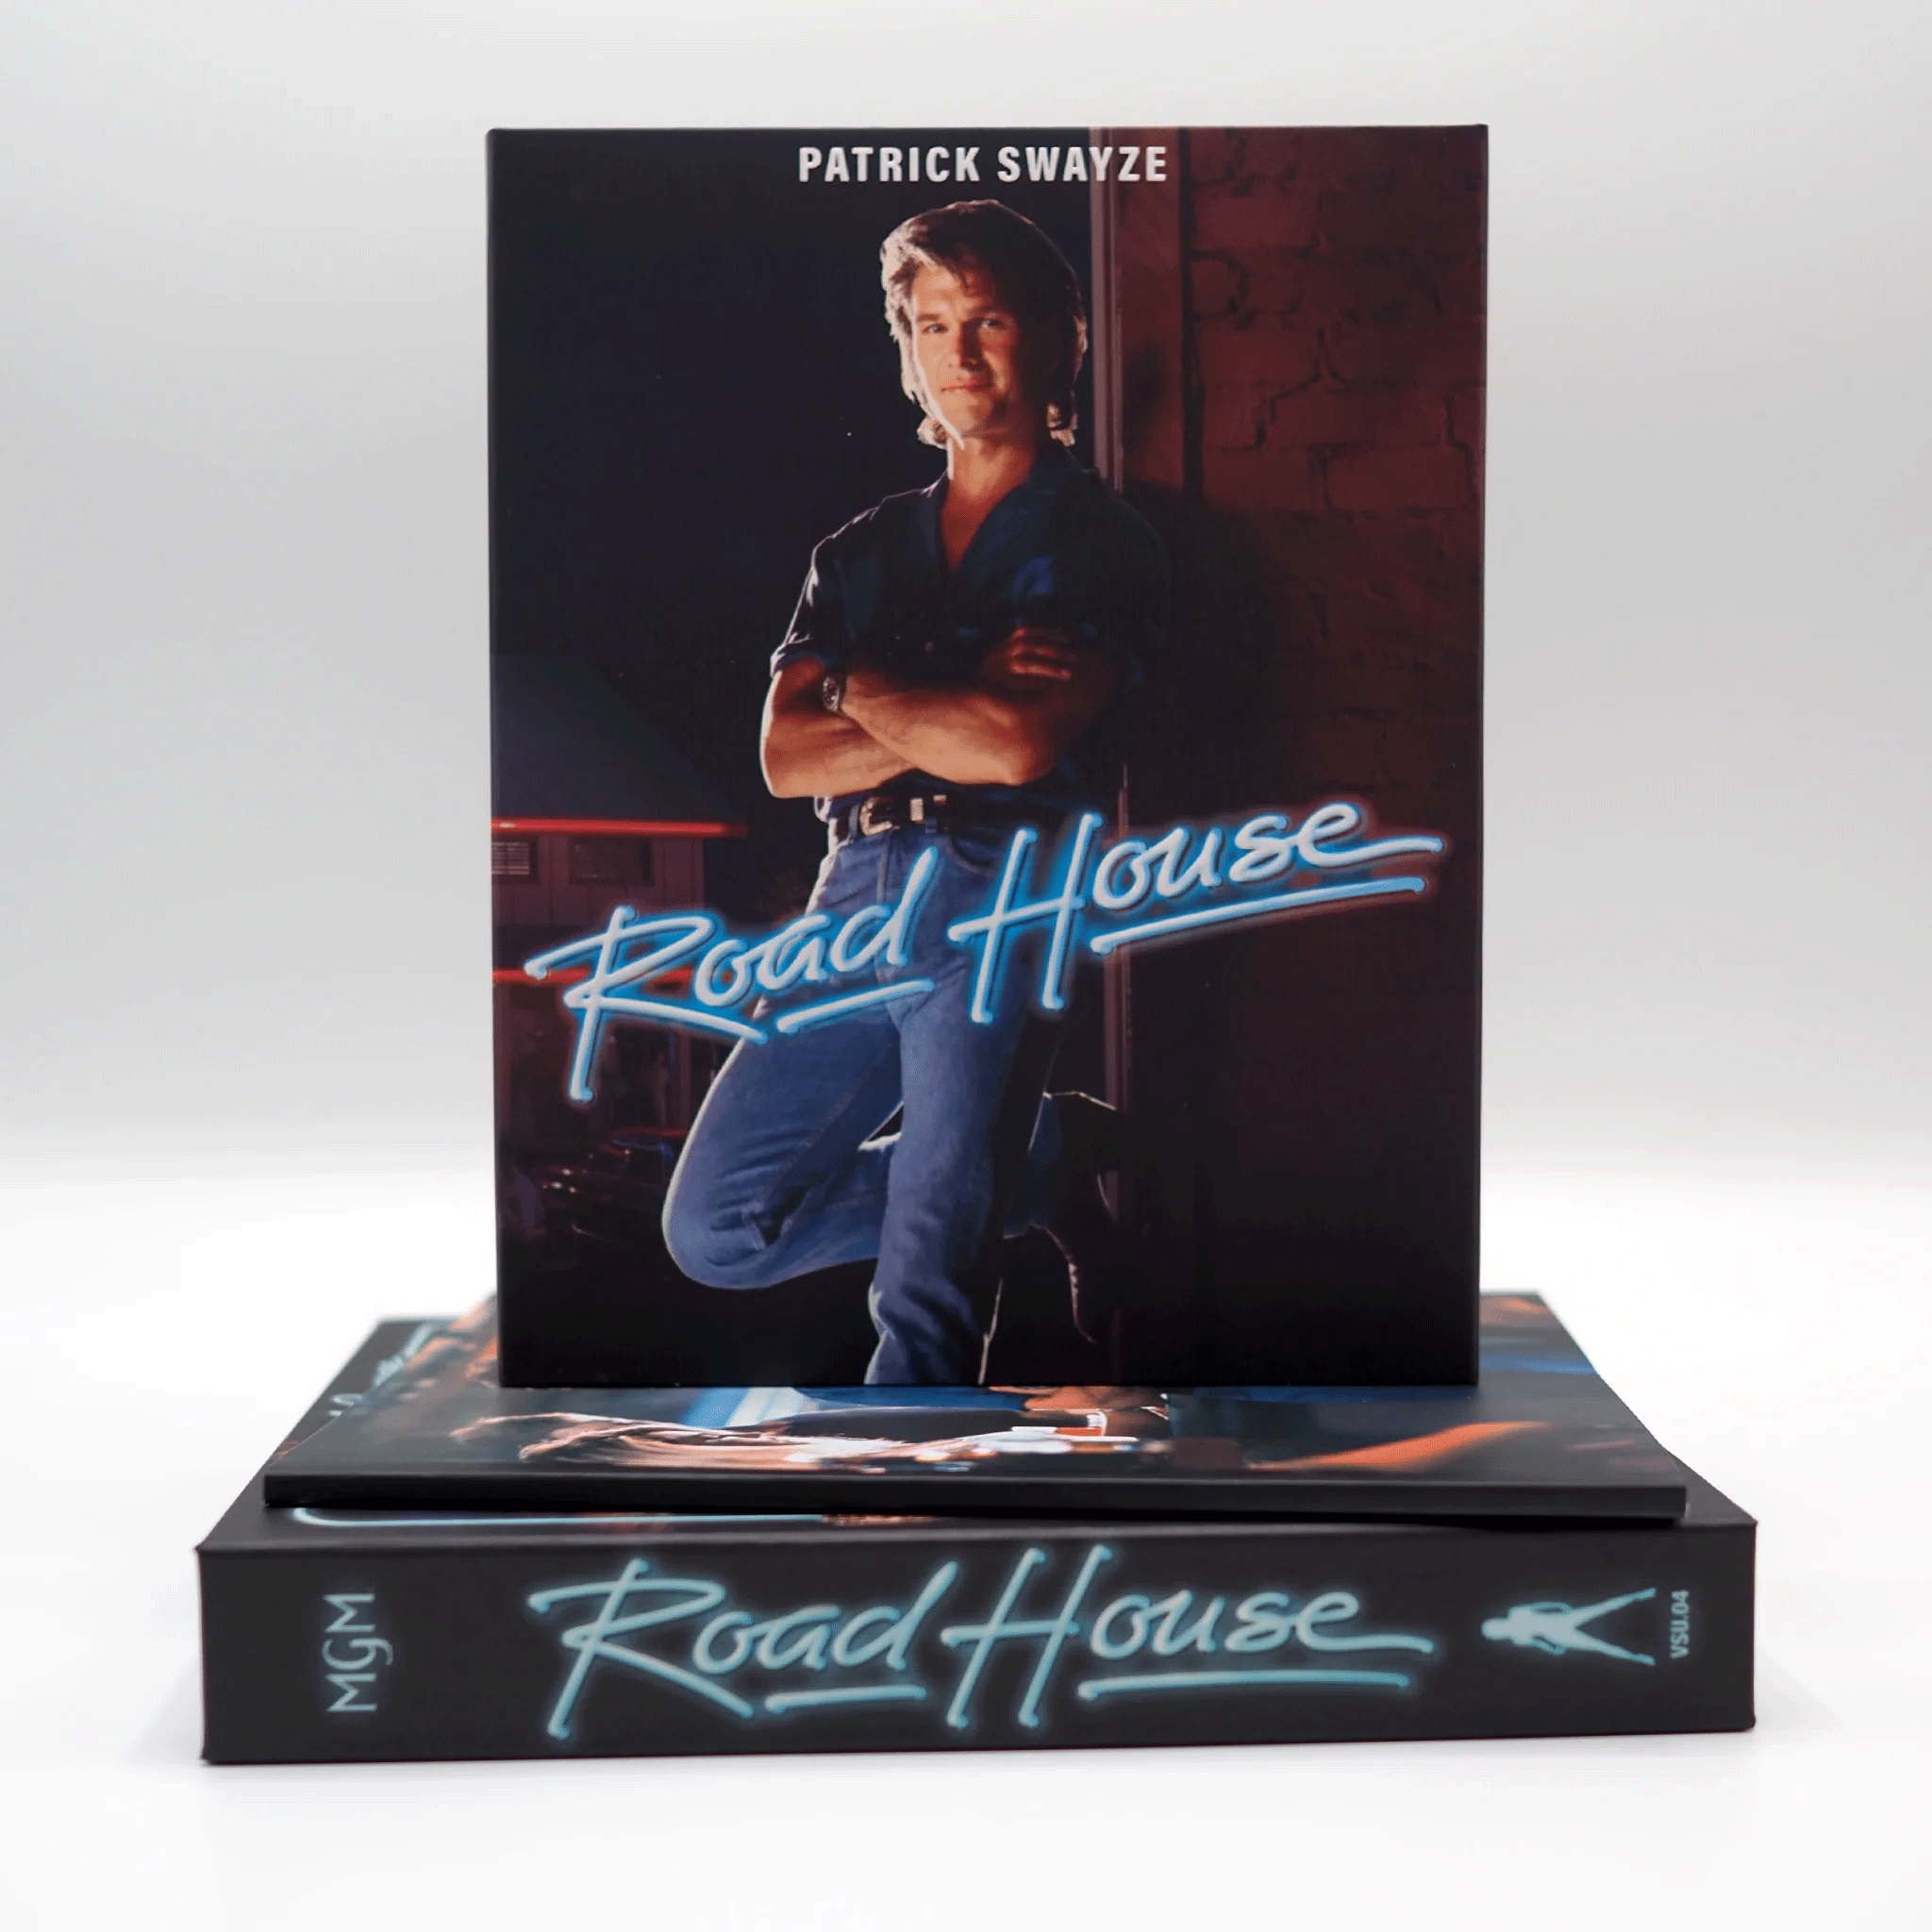 ROAD HOUSE - 4K ULTRA HD / BLU-RAY (LIMITED EDITION)